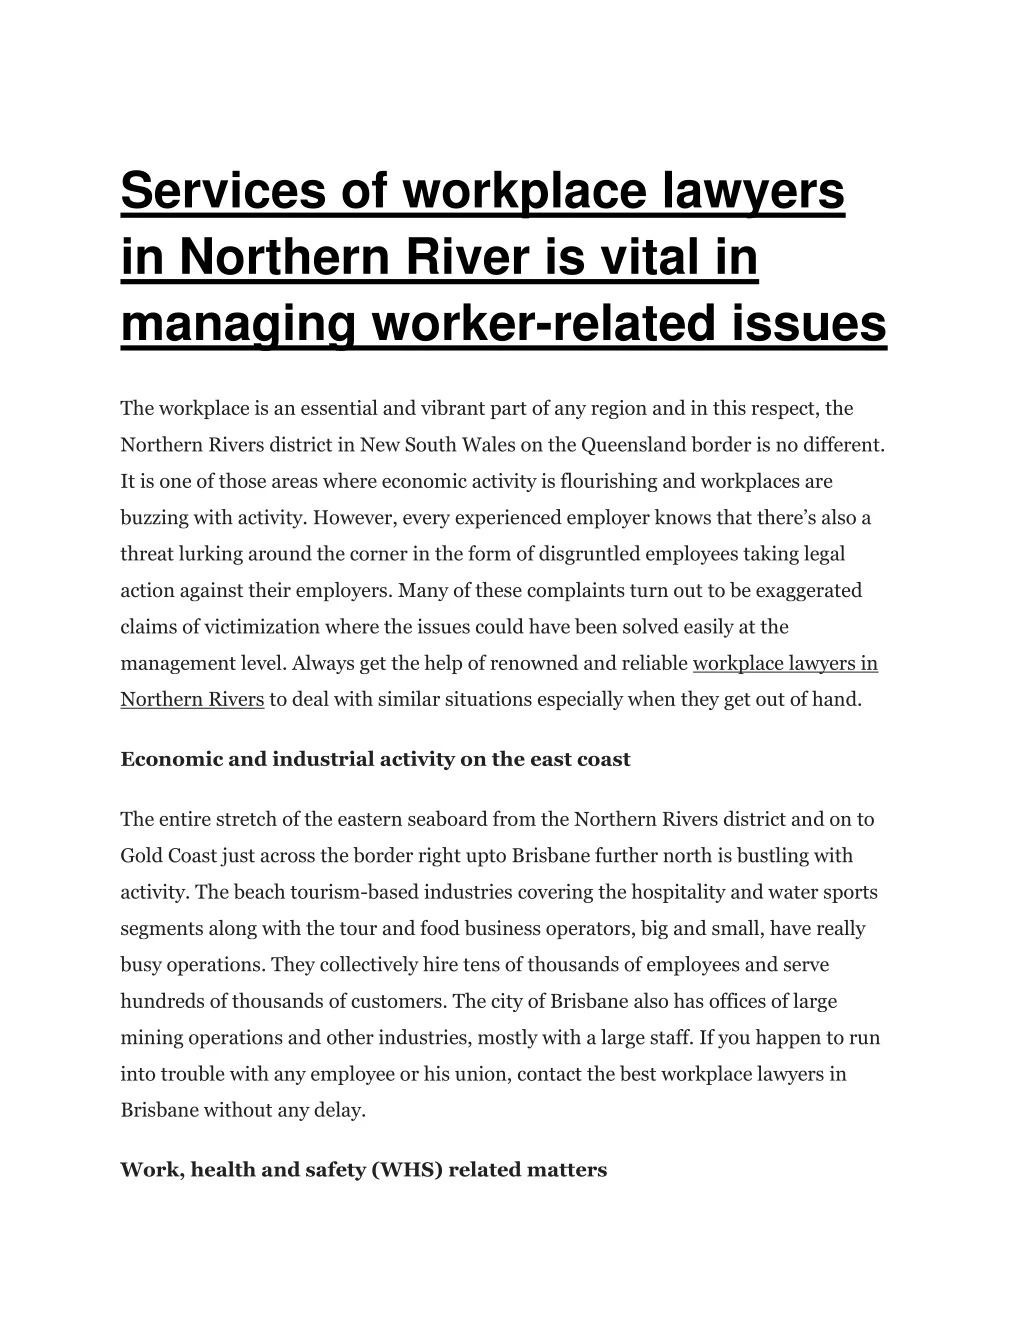 services of workplace lawyers in northern river